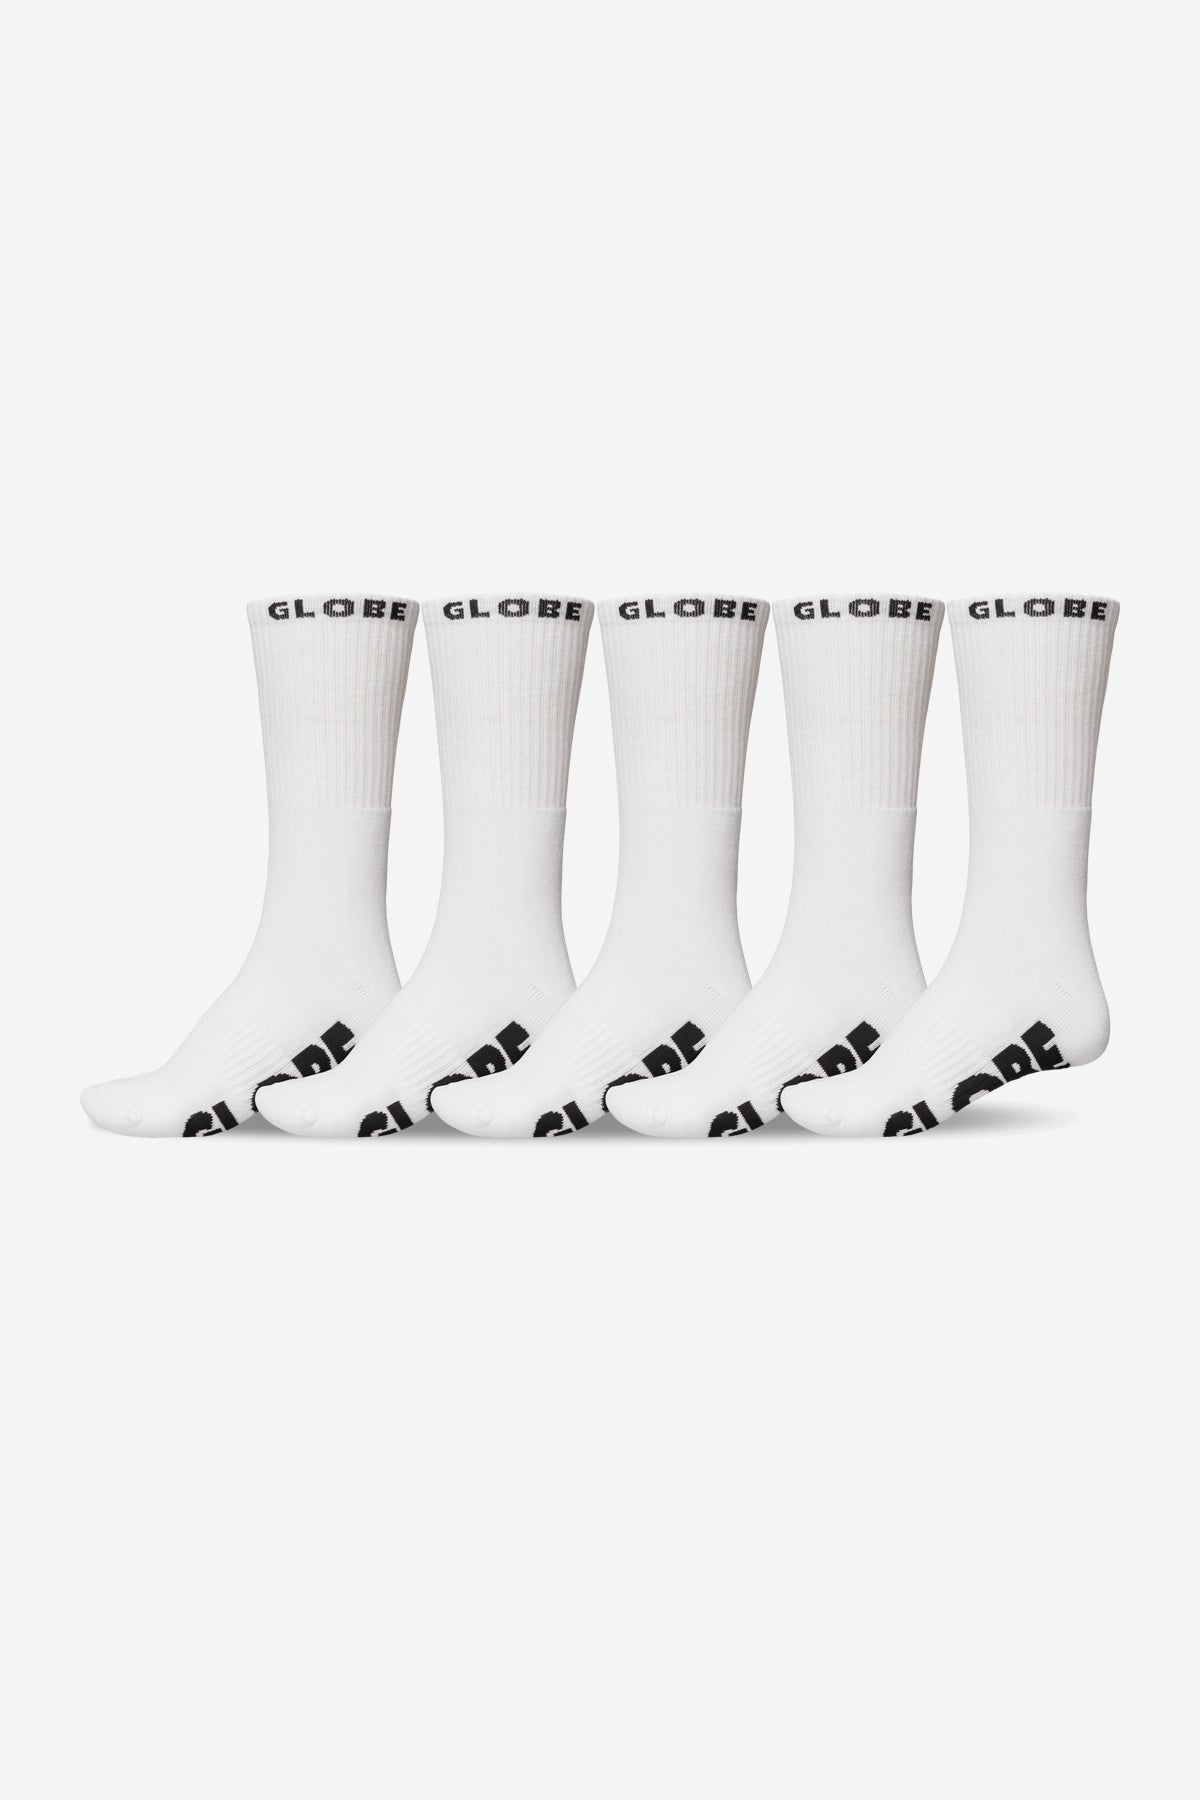 whiteout sock 5 pack